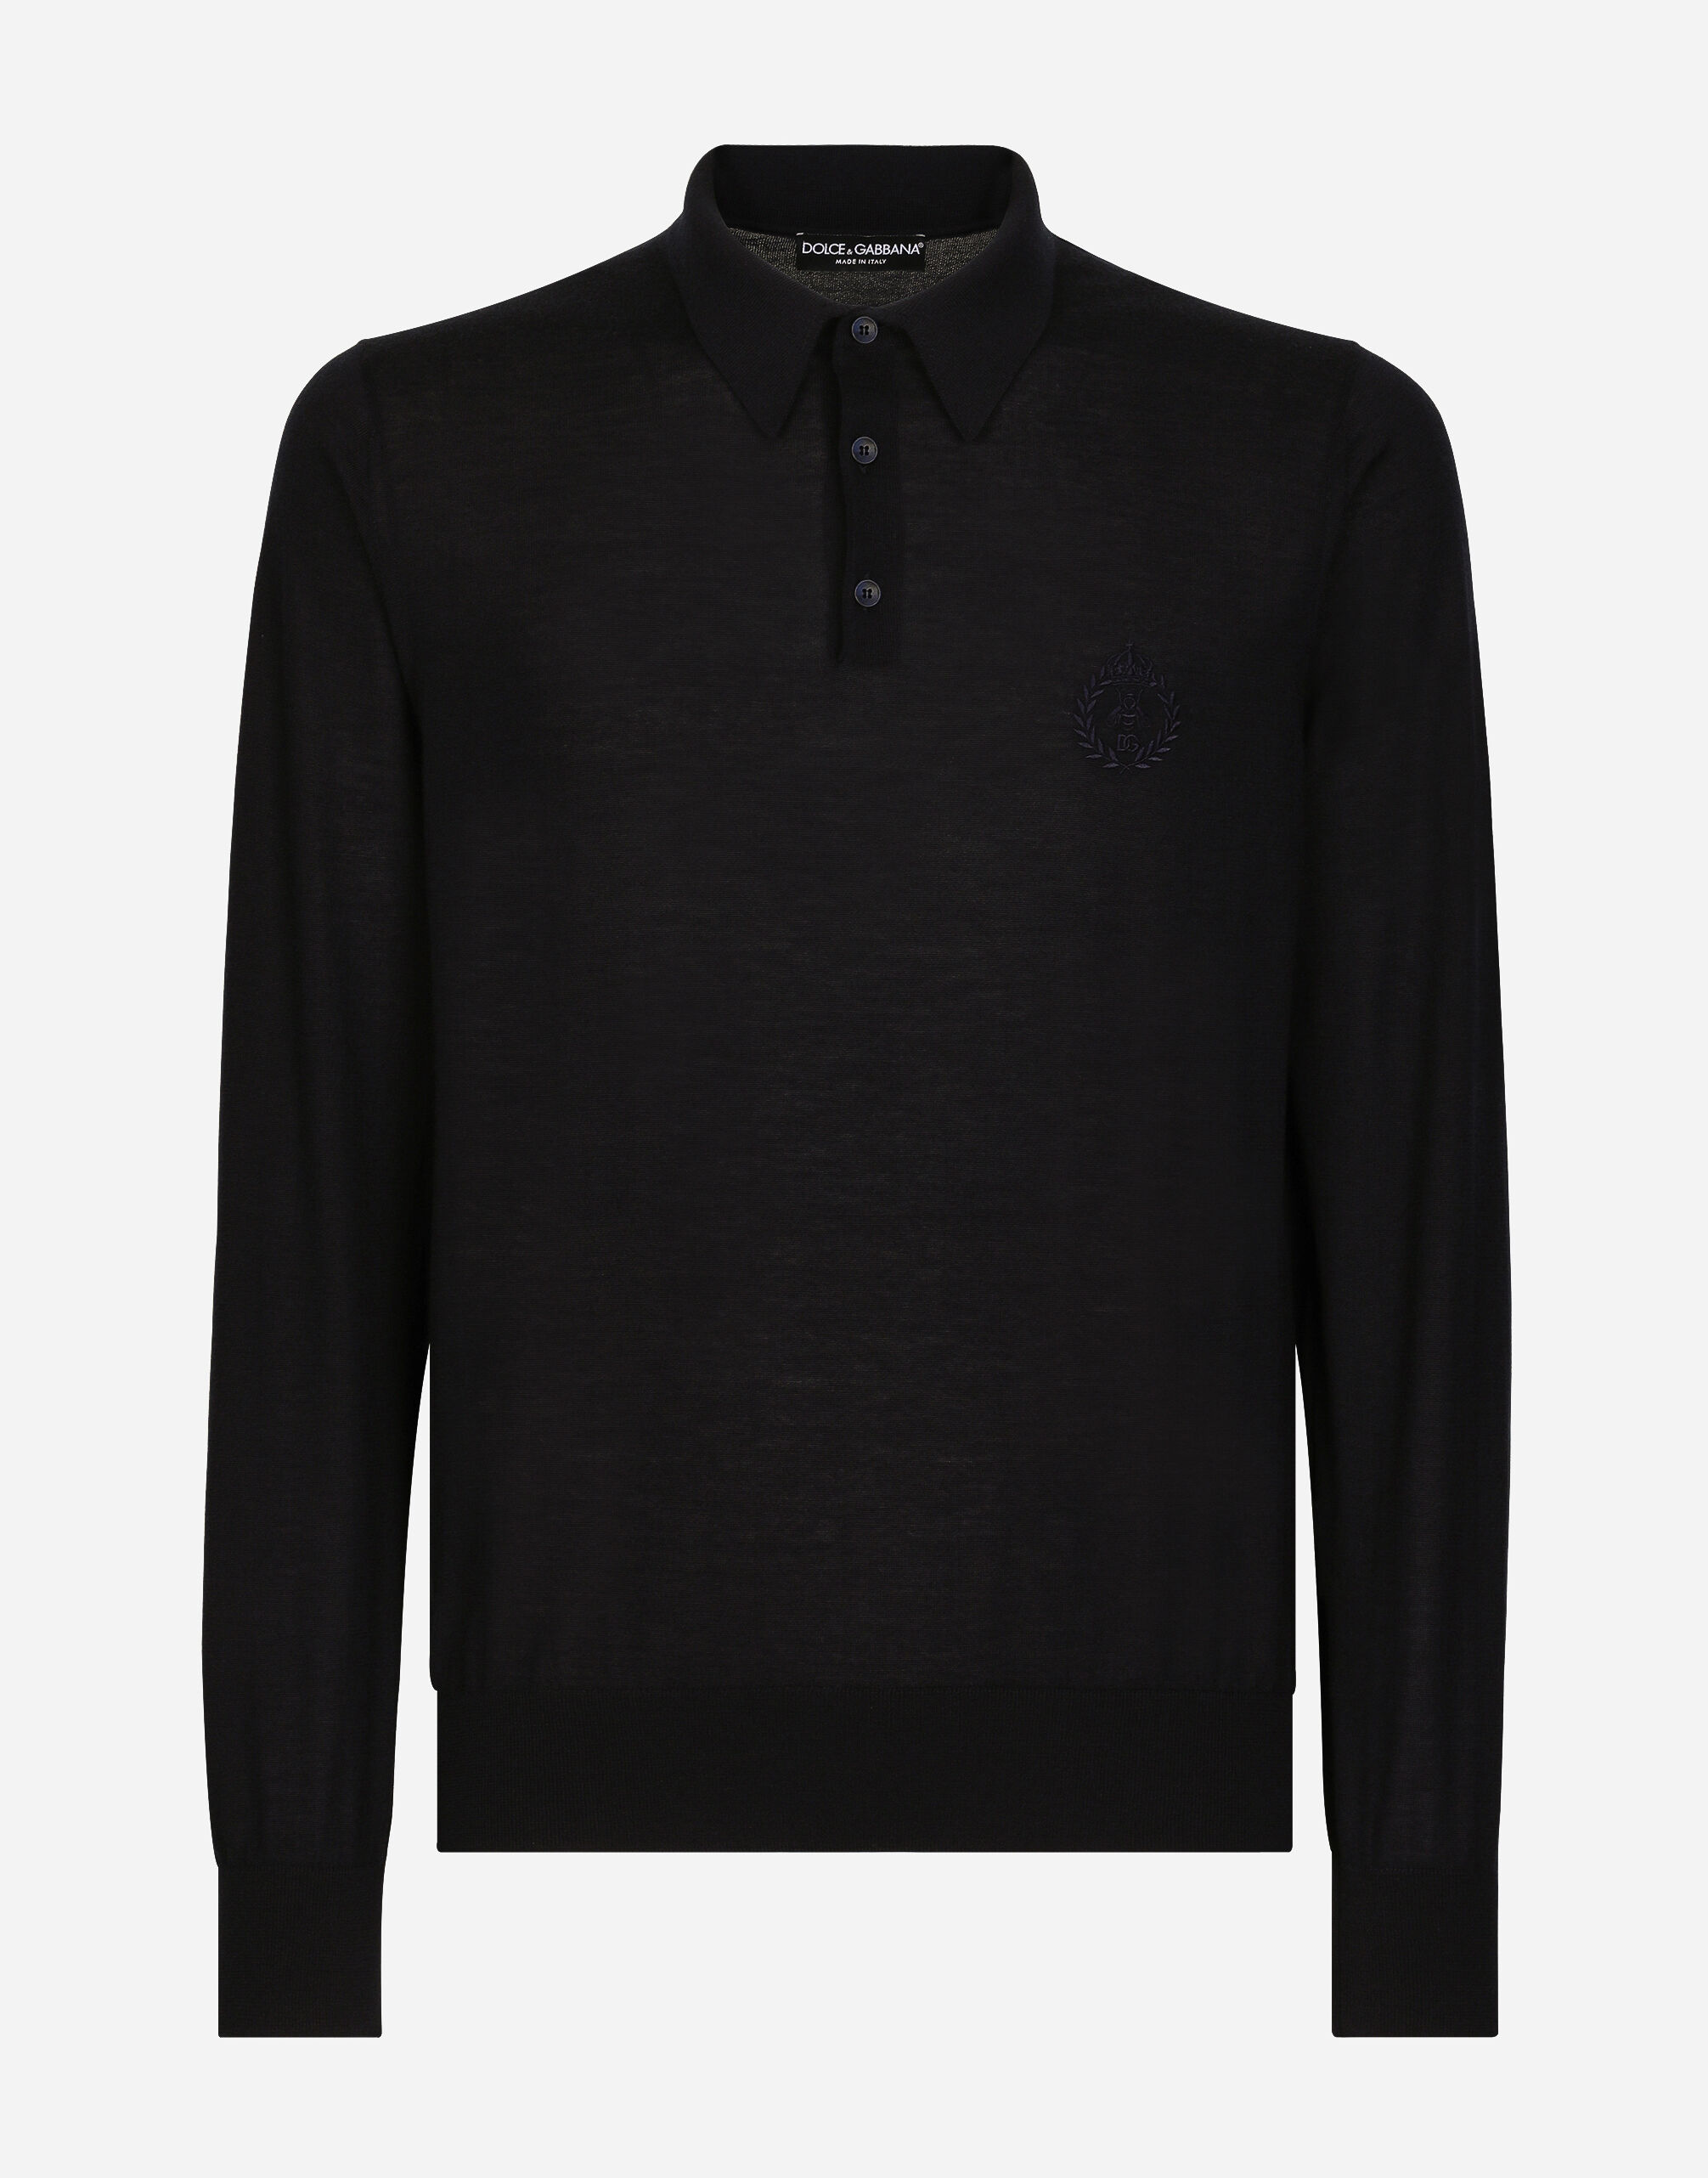 Dolce & Gabbana Cashmere polo-style sweater with DG logo embroidery Black GXL30TJAWM9